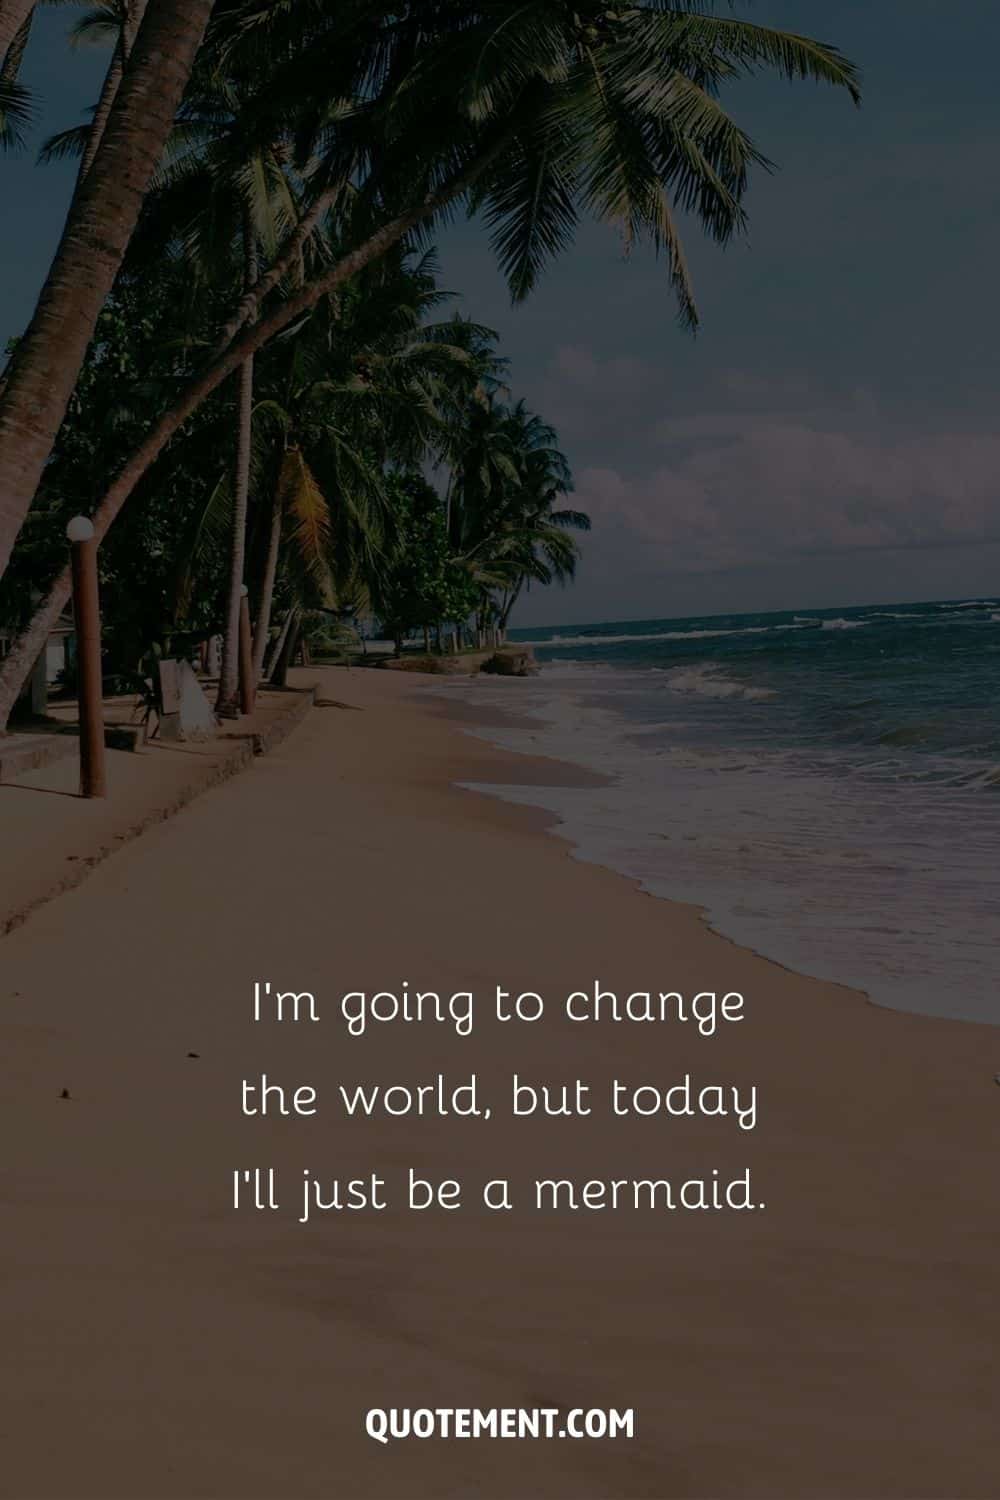 I’m going to change the world, but today I’ll just be a mermaid. – Unknown